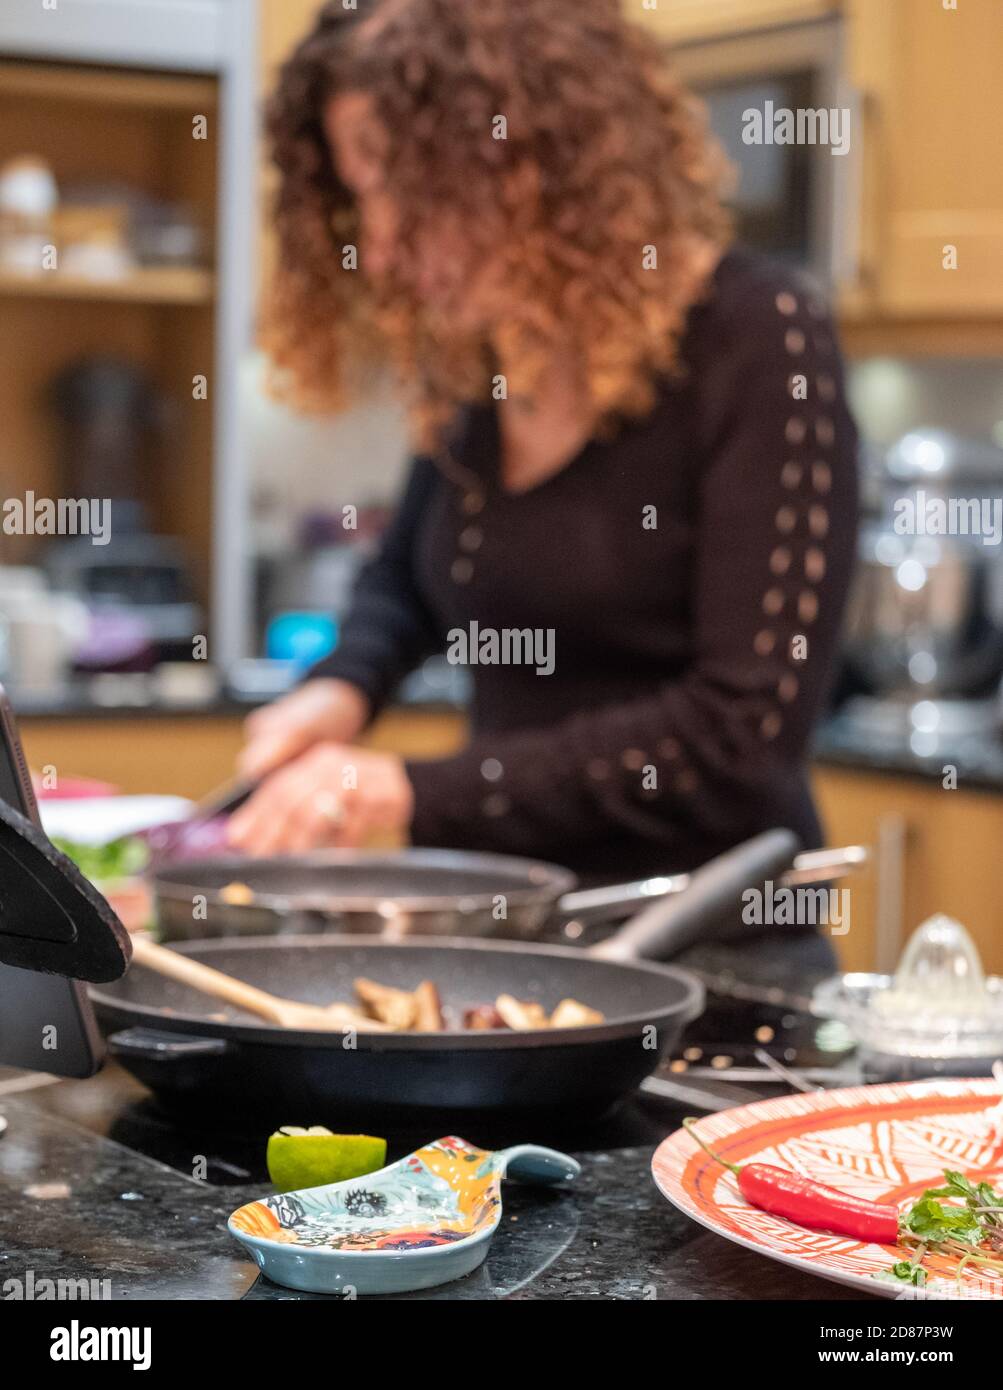 Woman preparing a vegan Asian Pad Thai stir fry with red cabbage, aubergine, tofu and noodles. Stock Photo